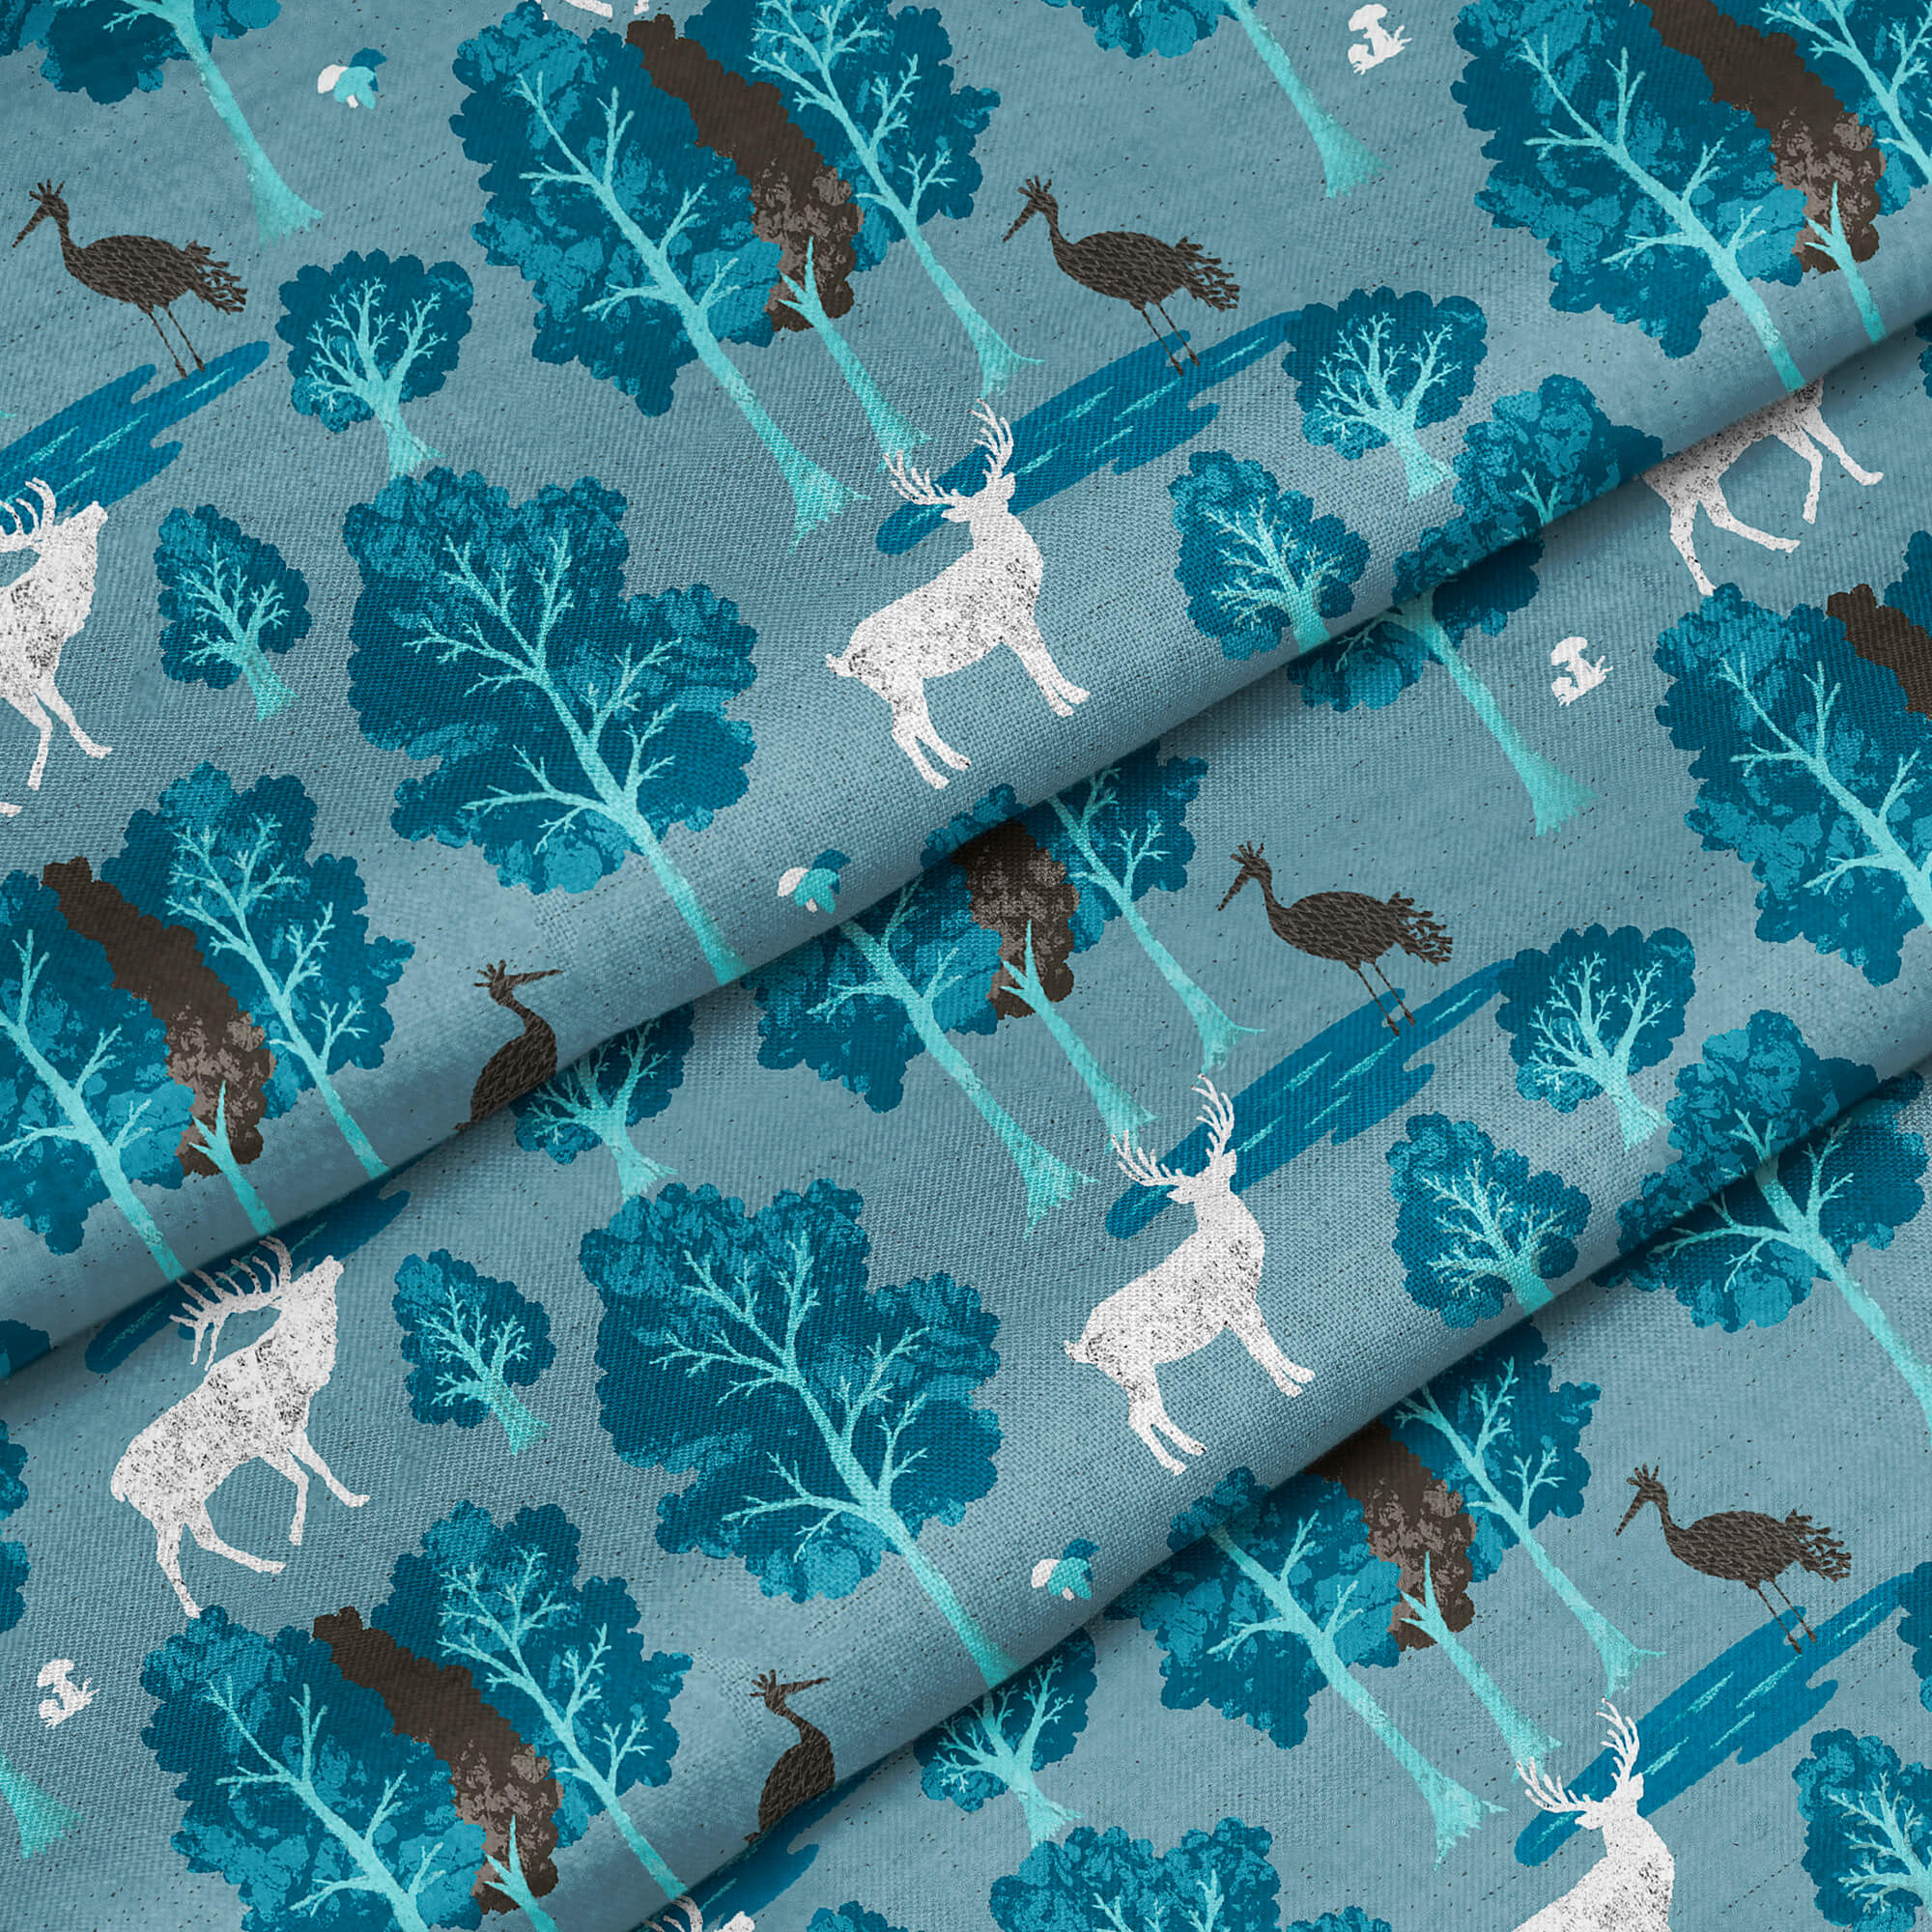 folded fabric with deer in blue forest design